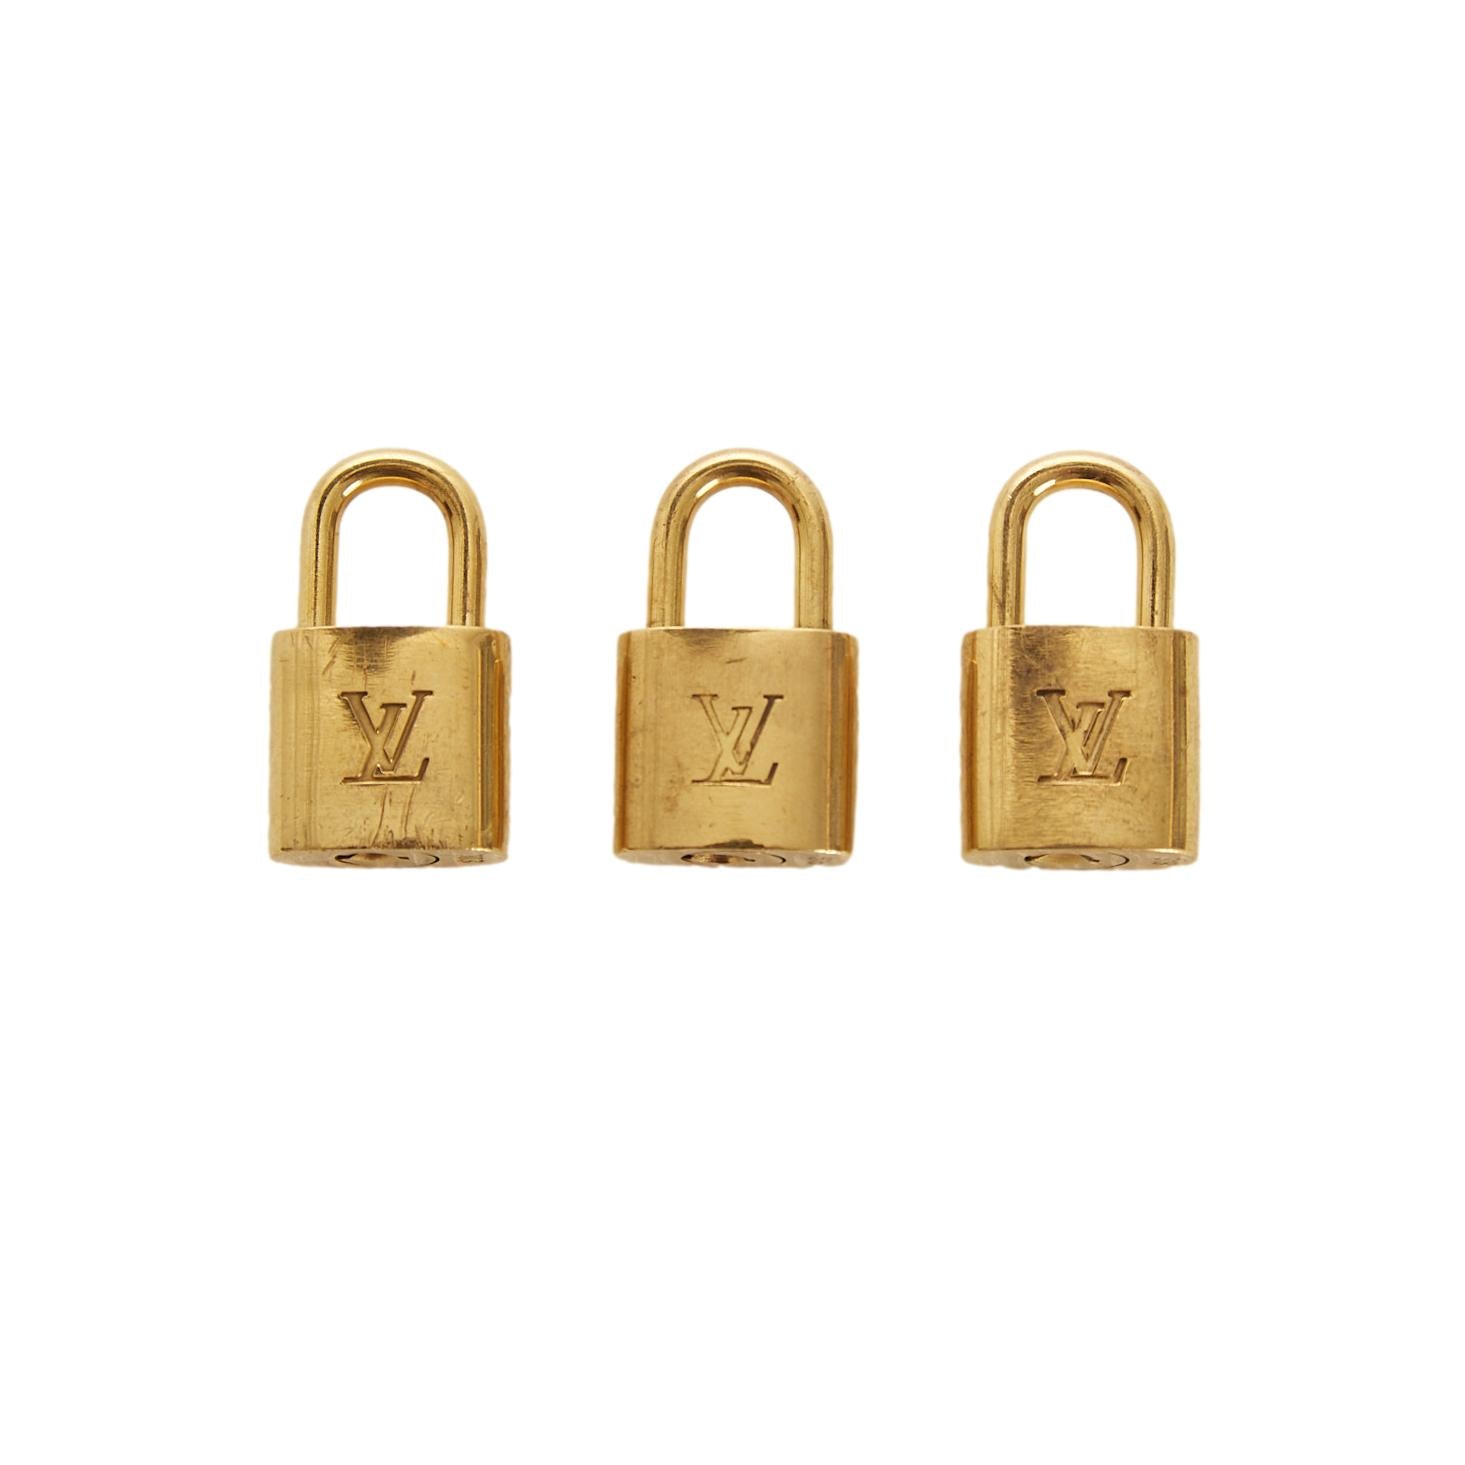 The Louis Vuitton Lock Collection